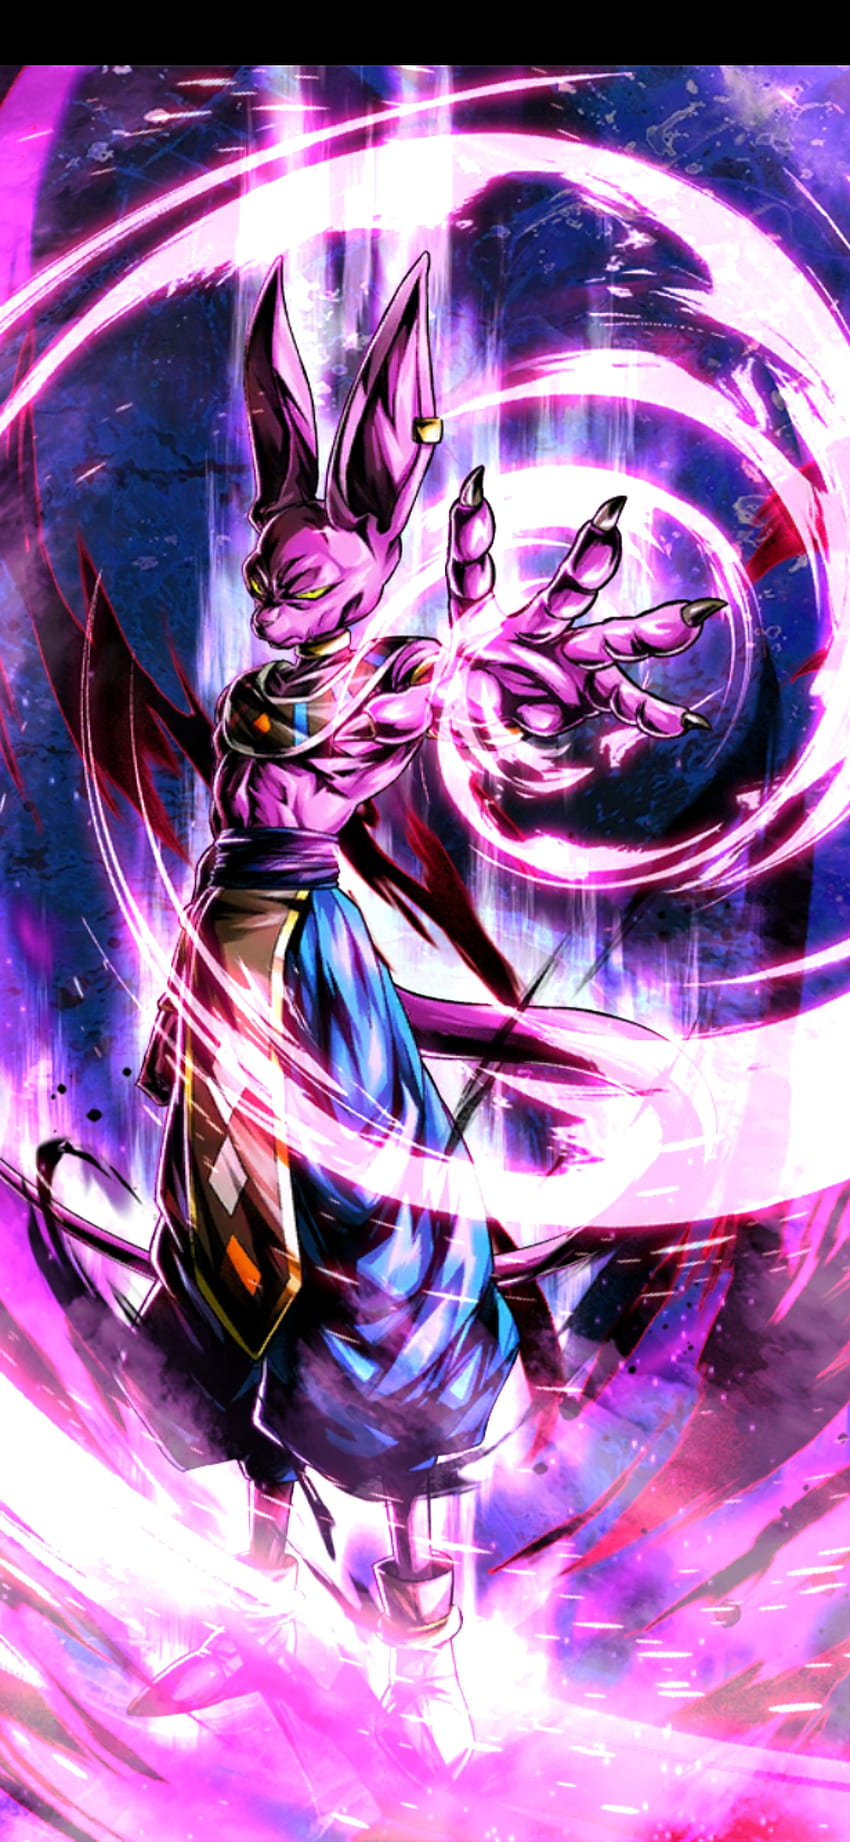 Lord Beerus Wallpaper Art Apk Download for Android Latest version 10  comandromodev660614app705698